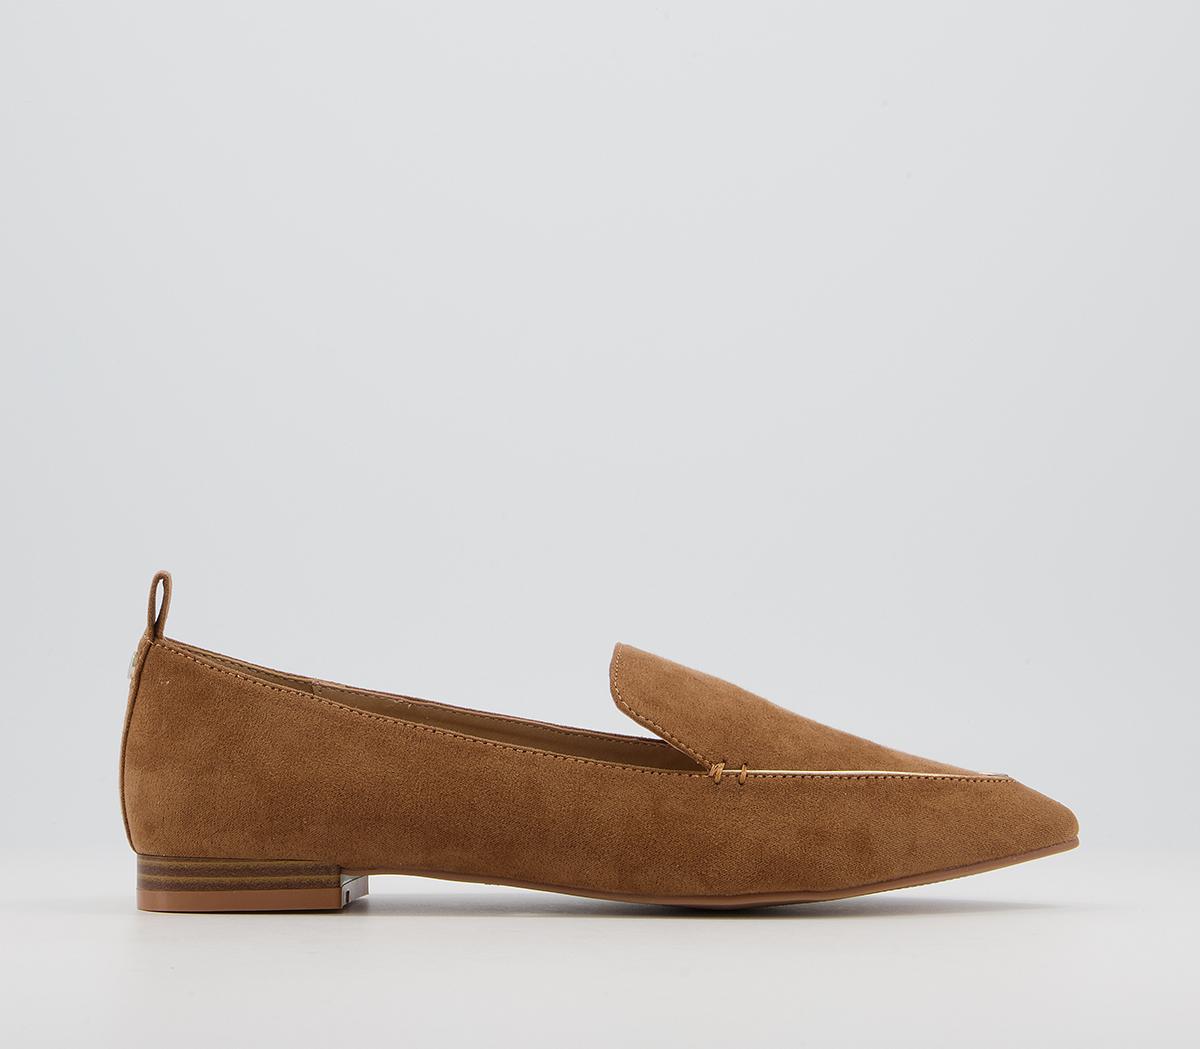 OFFICEFallon Pointed LoafersTaupe With Gold